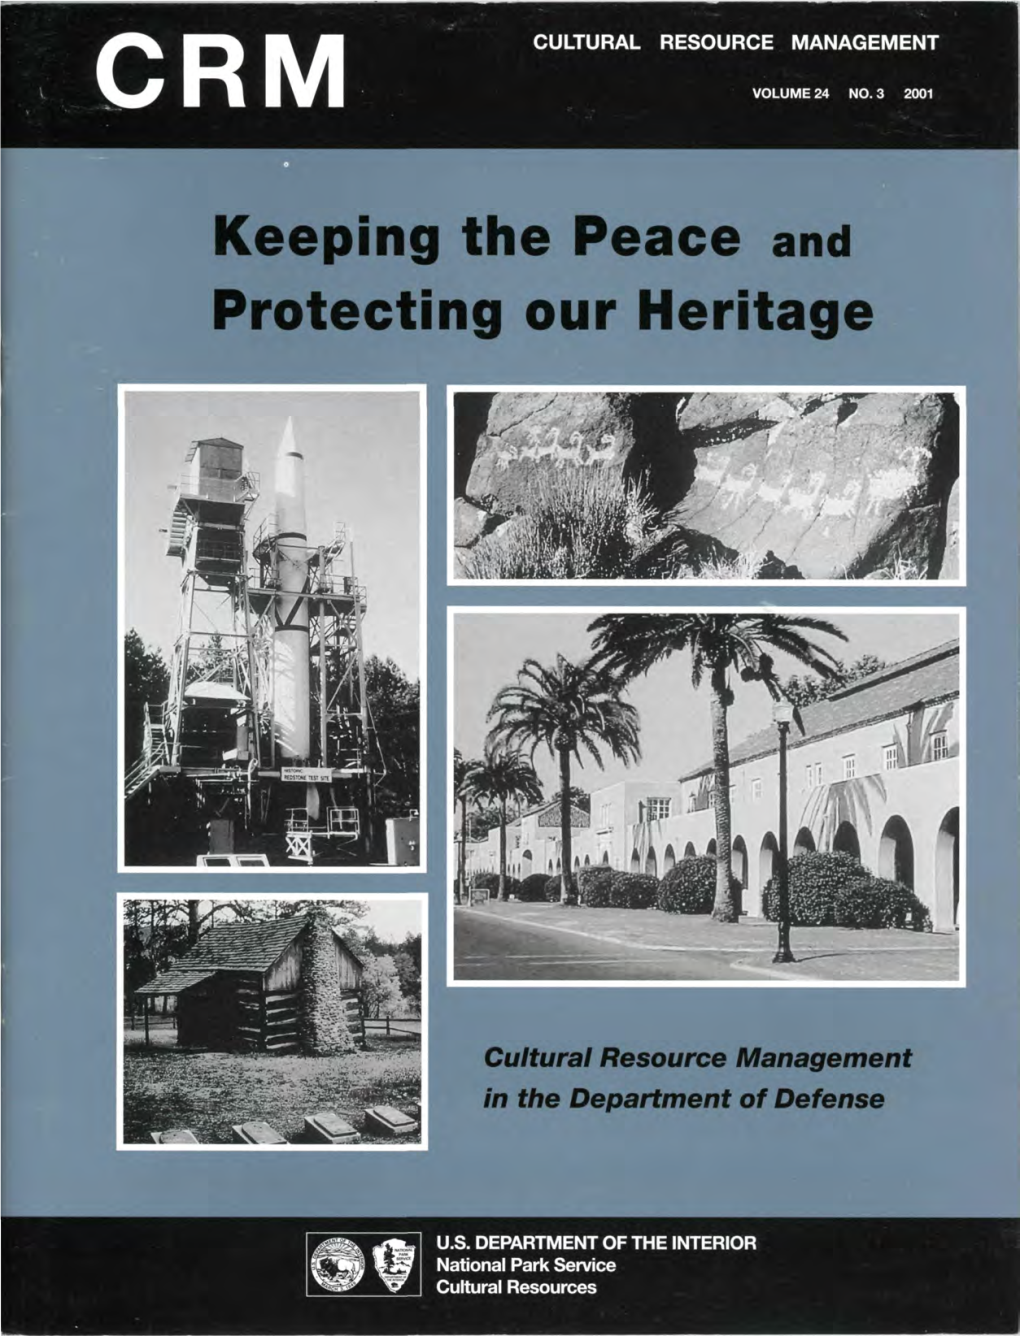 Keeping the Peace and Protecting Our Heritage